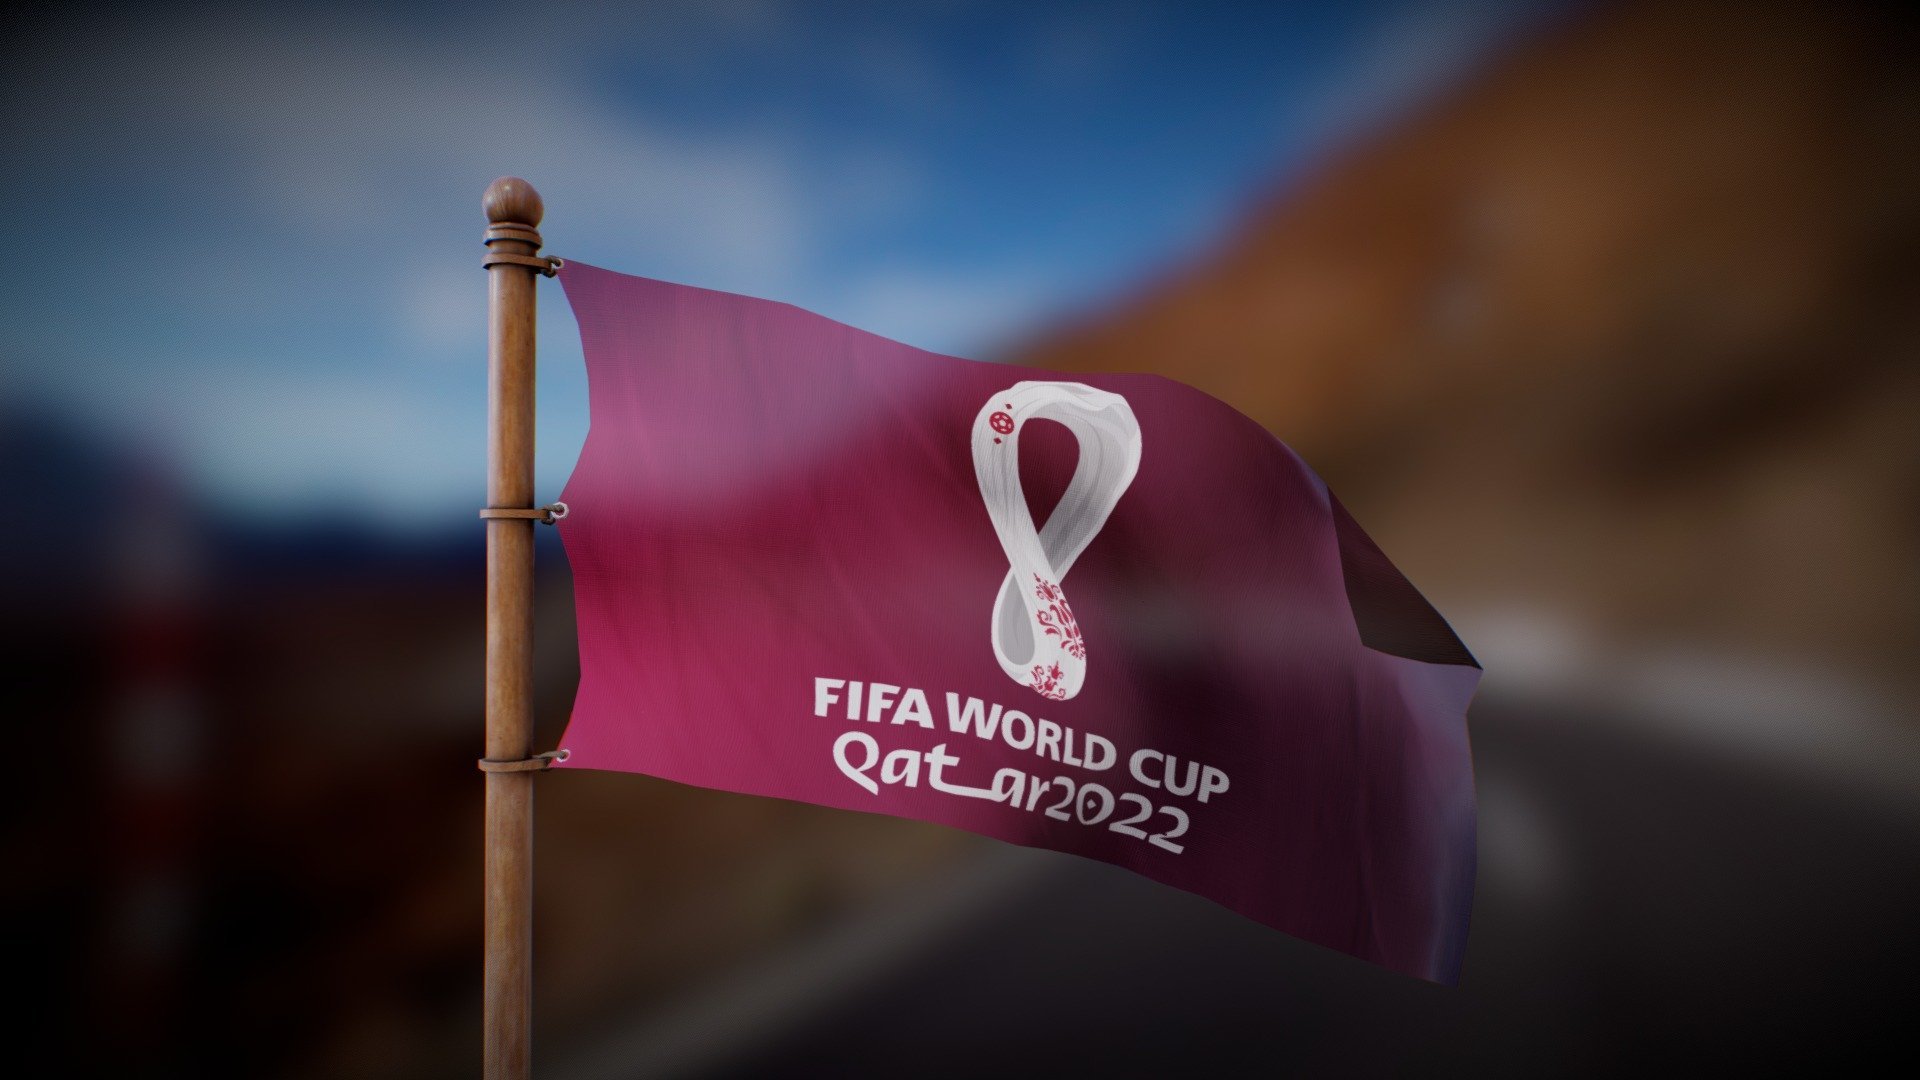 FIFA World Cup Qatar 2022 flag Animated Royalty Free 3D model by Deftroy [d793a3e]